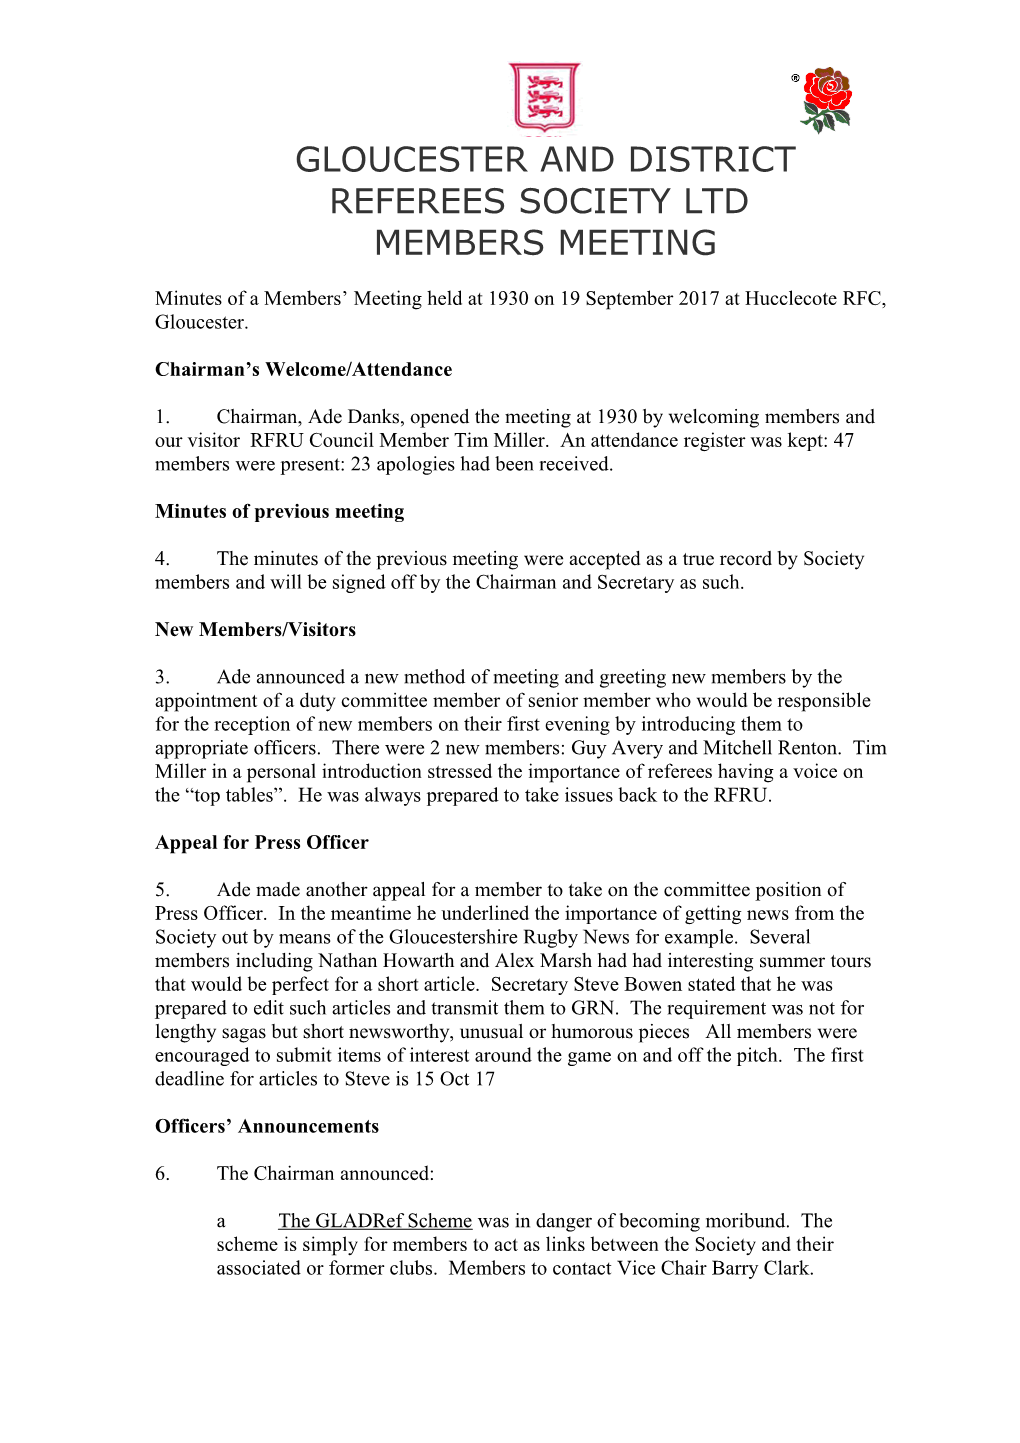 Agenda for Committee Meeting to Be Held on 9Th June 2009 at 32 Lonsdale Road, Gloucester